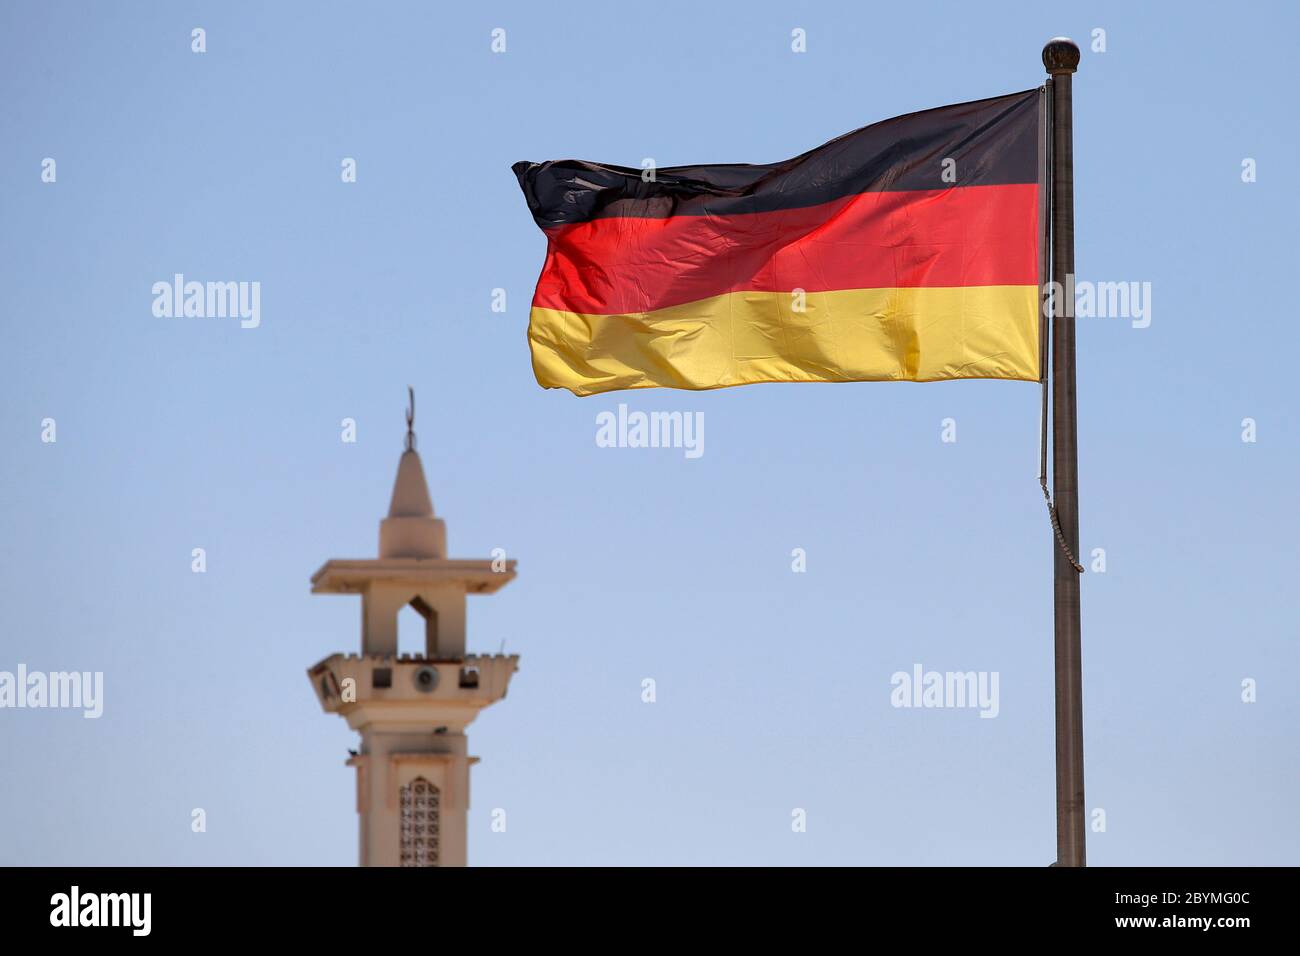 27.02.2020, Doha, , Qatar - National flag of the Federal Republic of Germany waving in front of a minaret. 00S200227D372CAROEX.JPG [MODEL RELEASE: NO, Stock Photo